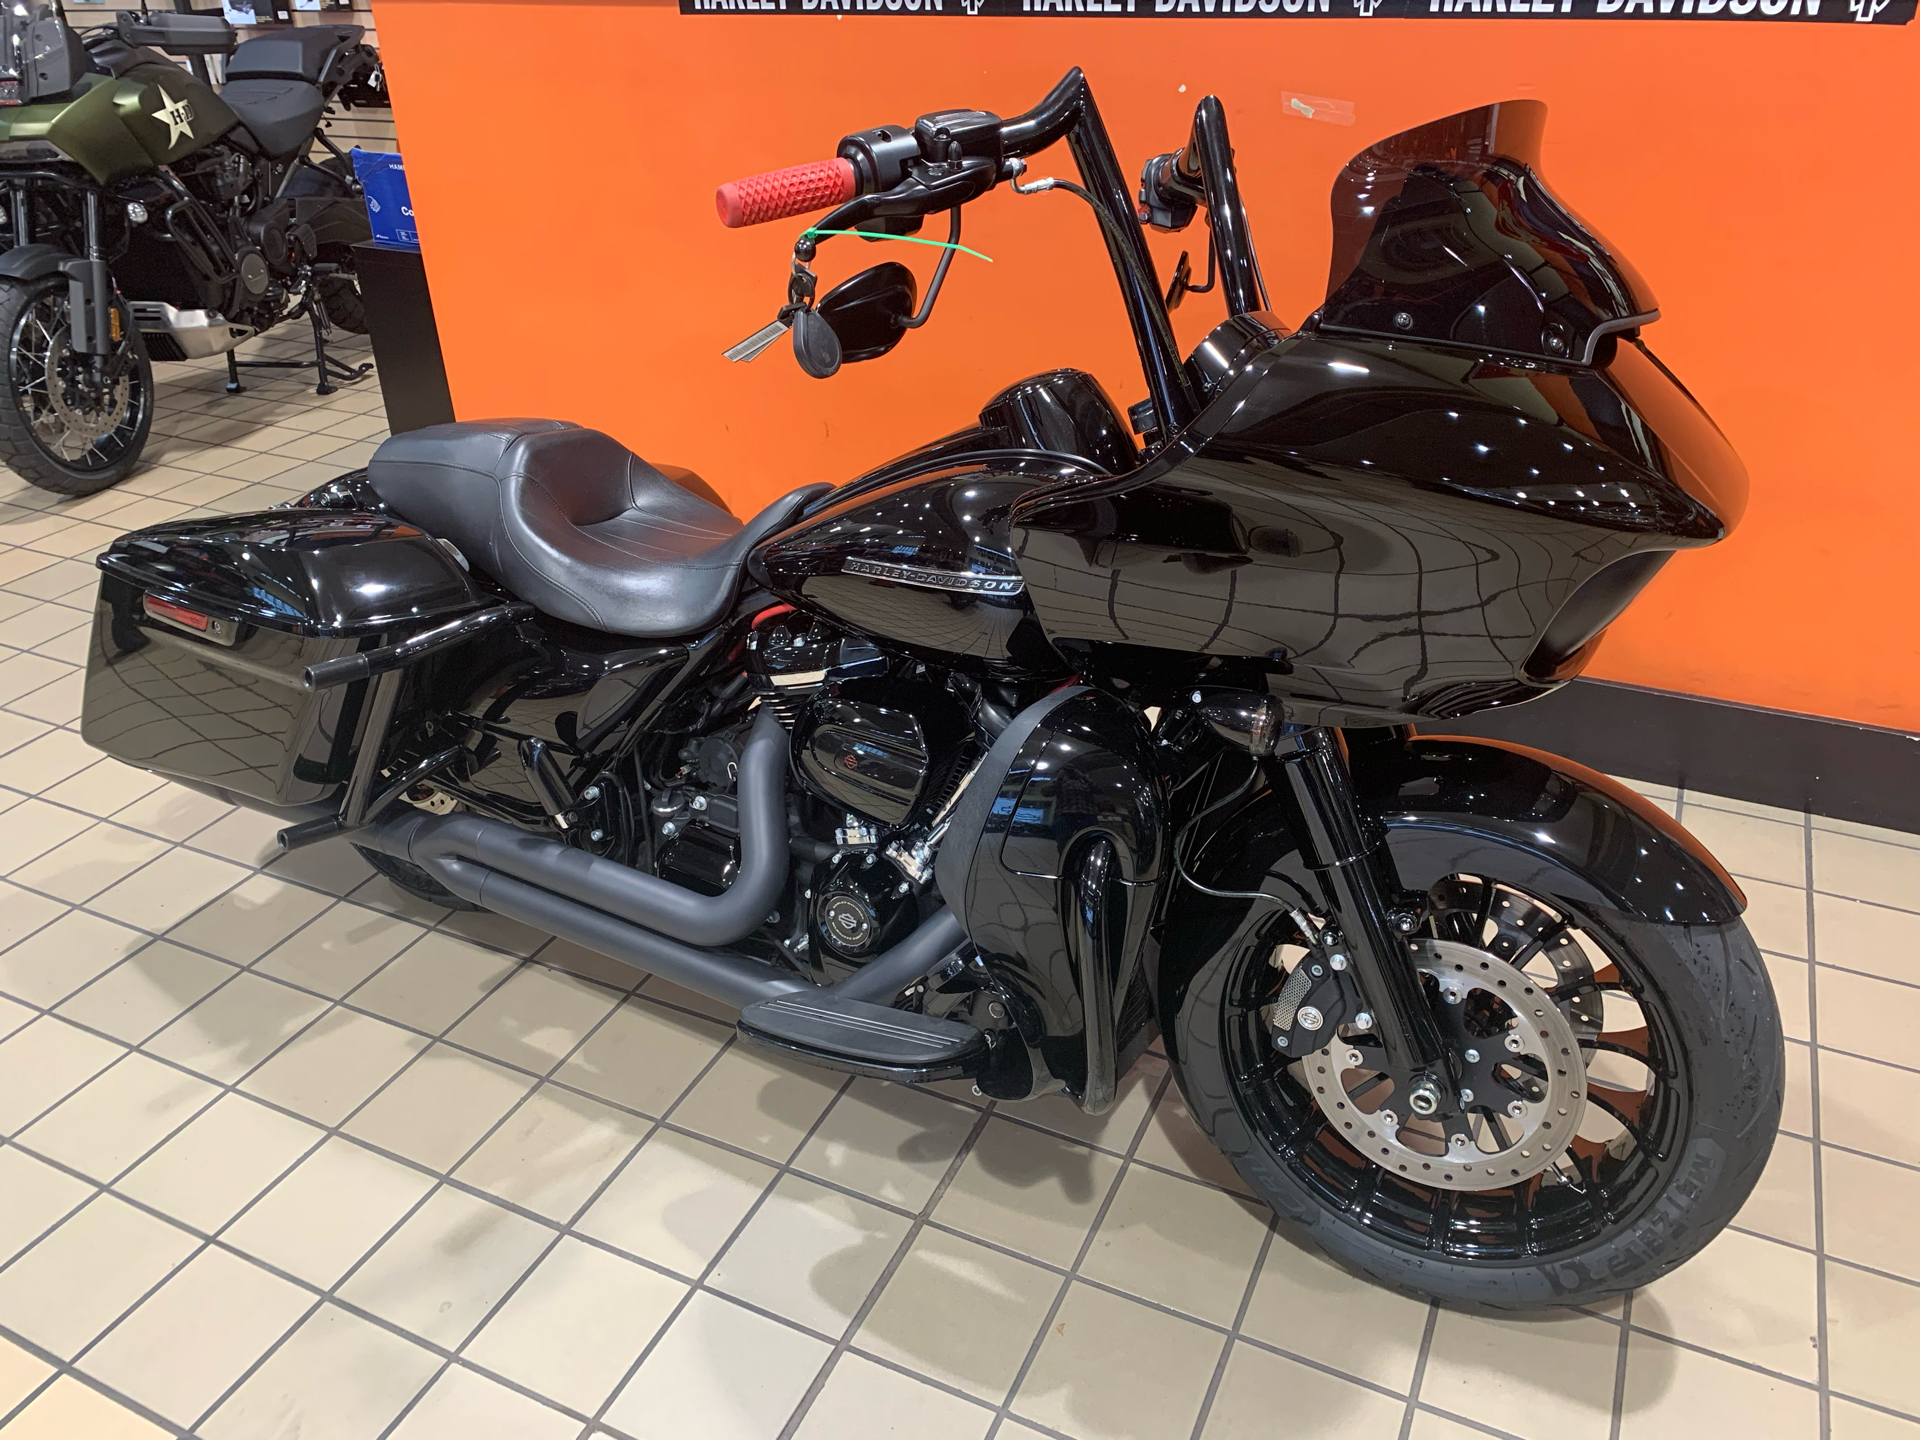 2019 Harley-Davidson ROAD GLIDE SPECIAL in Dumfries, Virginia - Photo 1